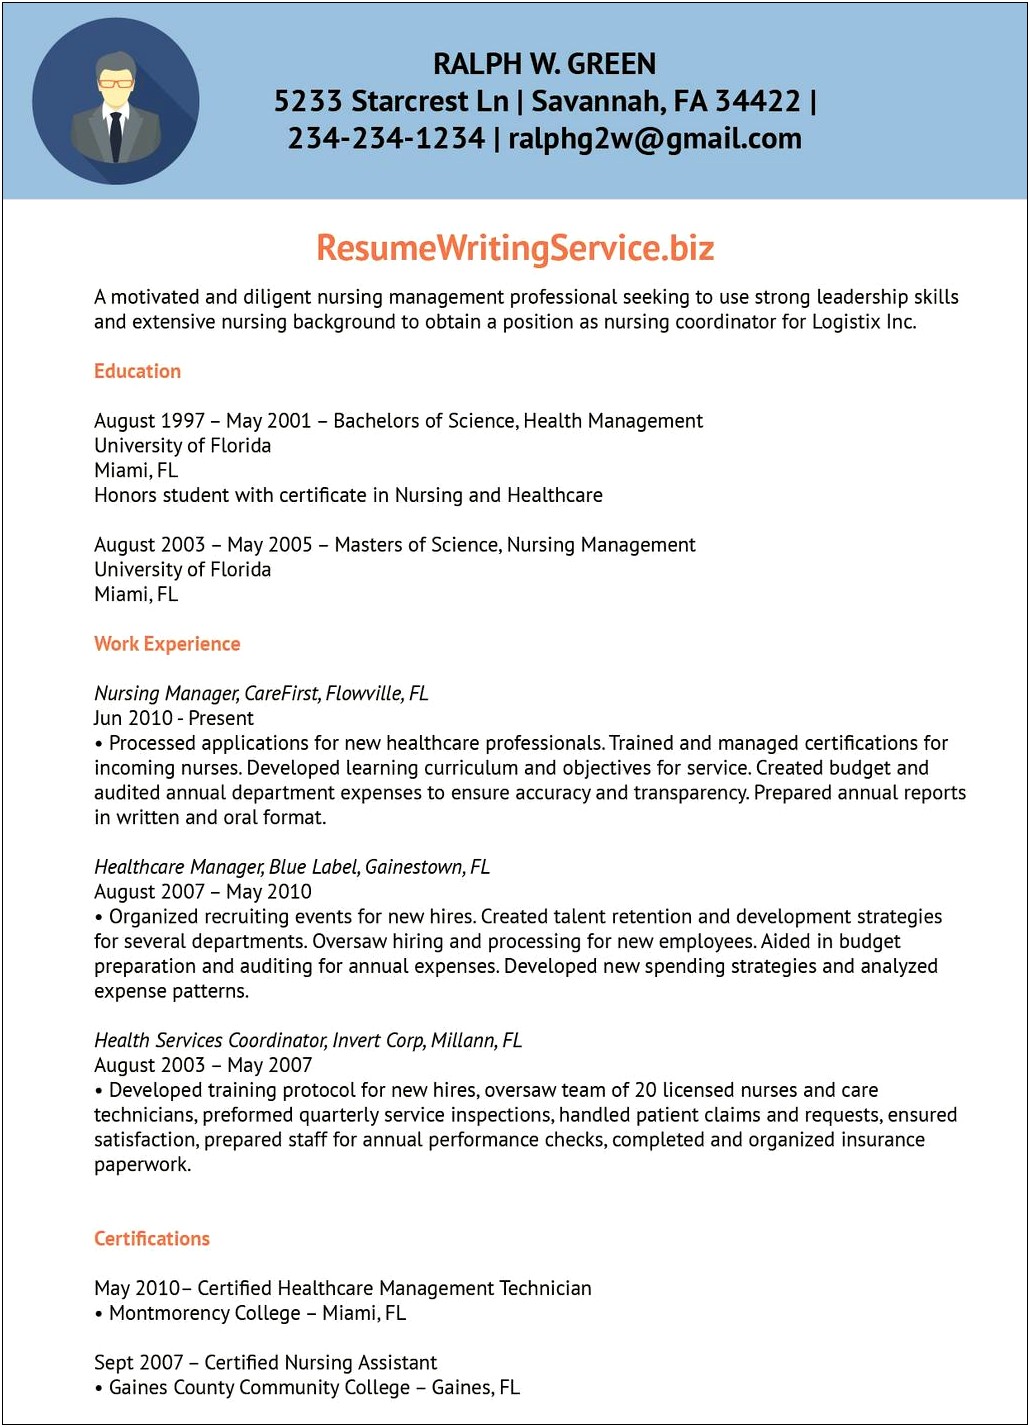 Resume Sample For Patient Care Technician